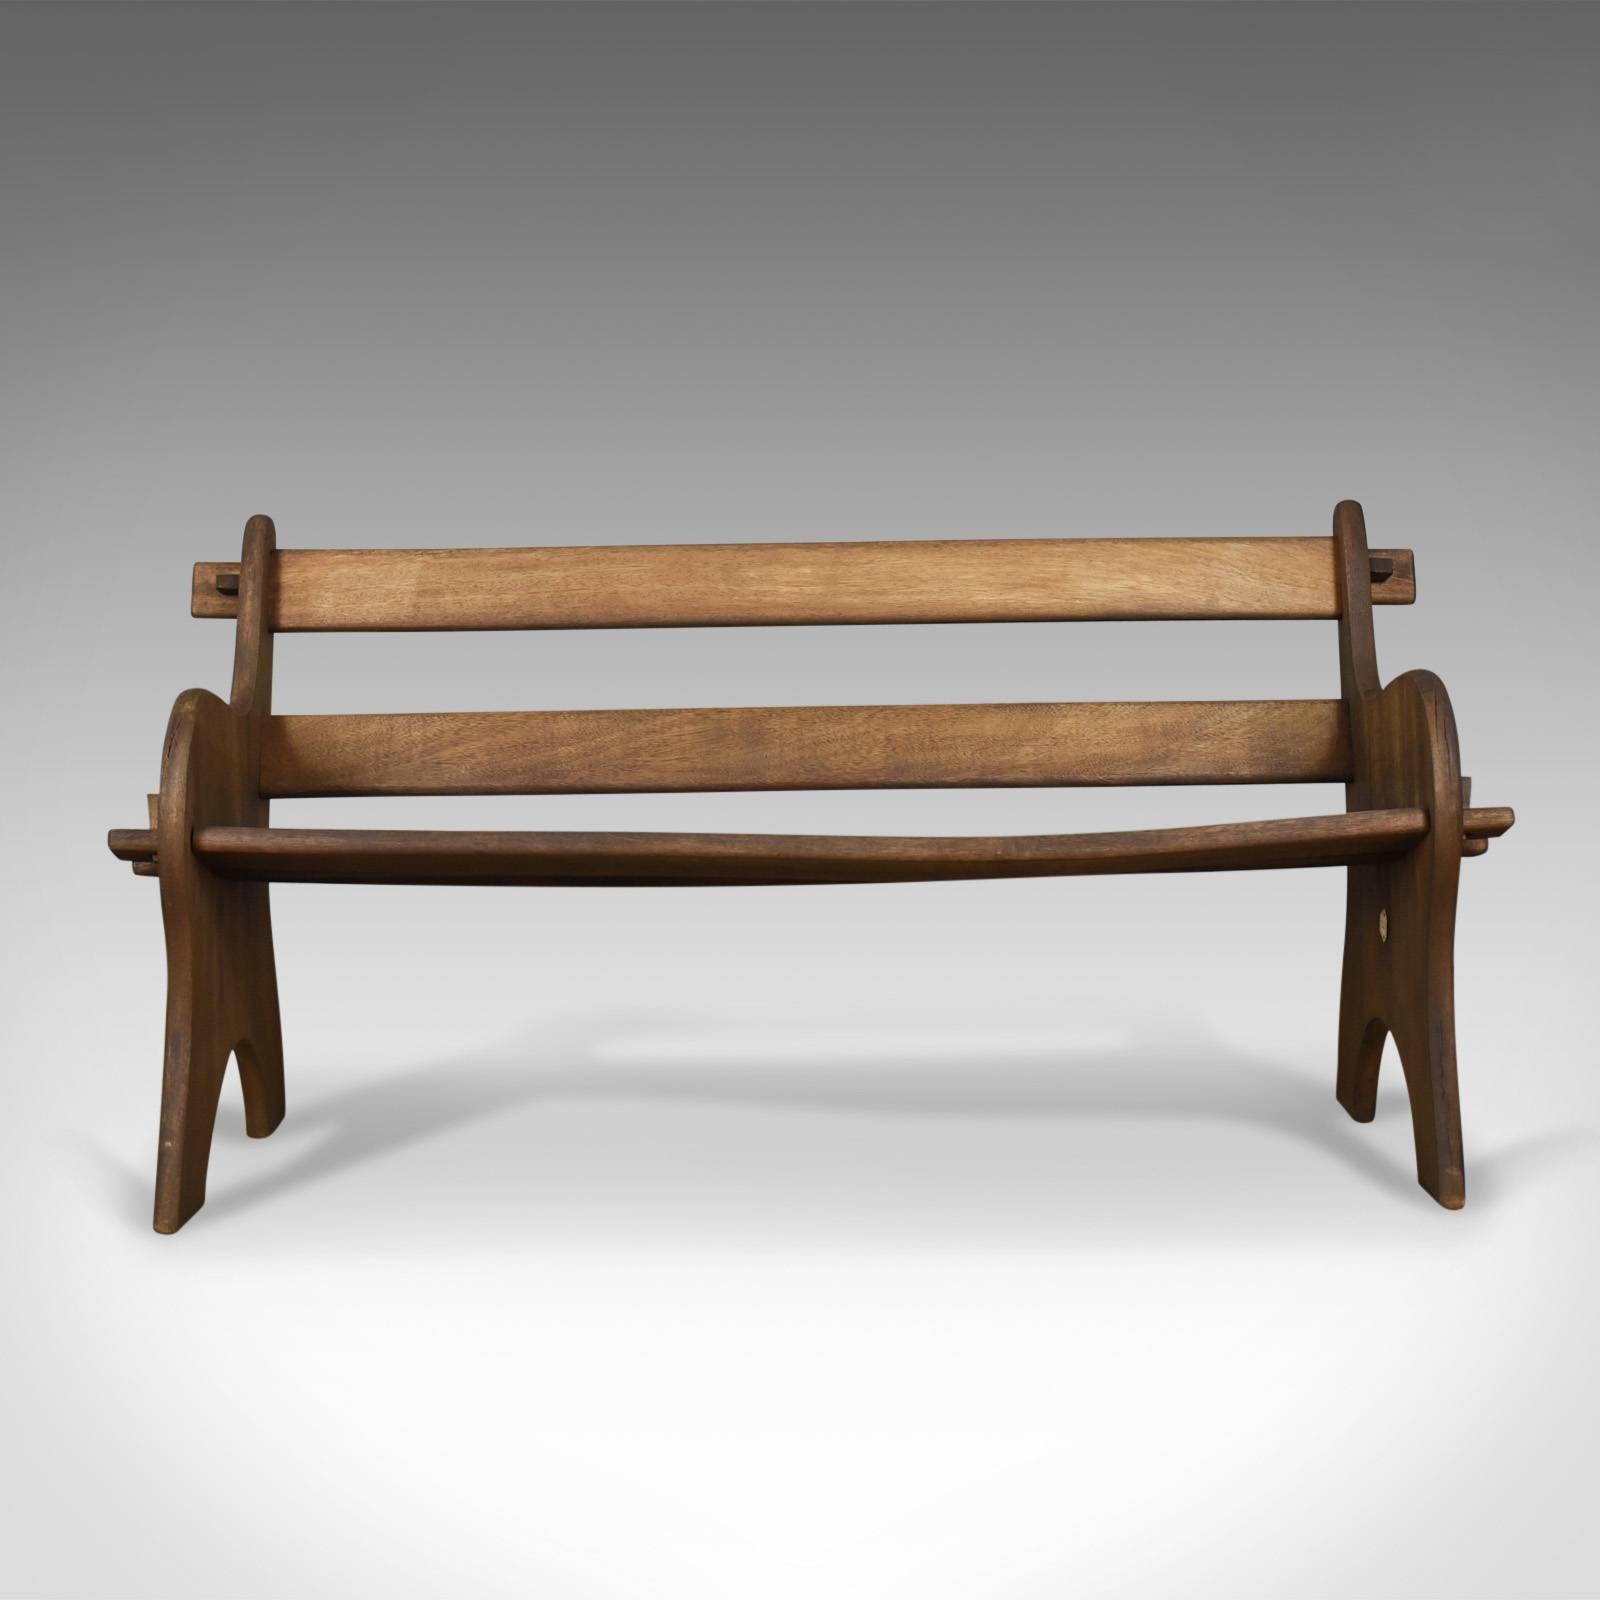 This is a vintage Branson Burbage bench, an English hardwood bench for outdoor or indoor use dating to the late 20th century.

Solid hardwood with a dark finish
Classic design with country character
Wedged design for easy assembly, simply store